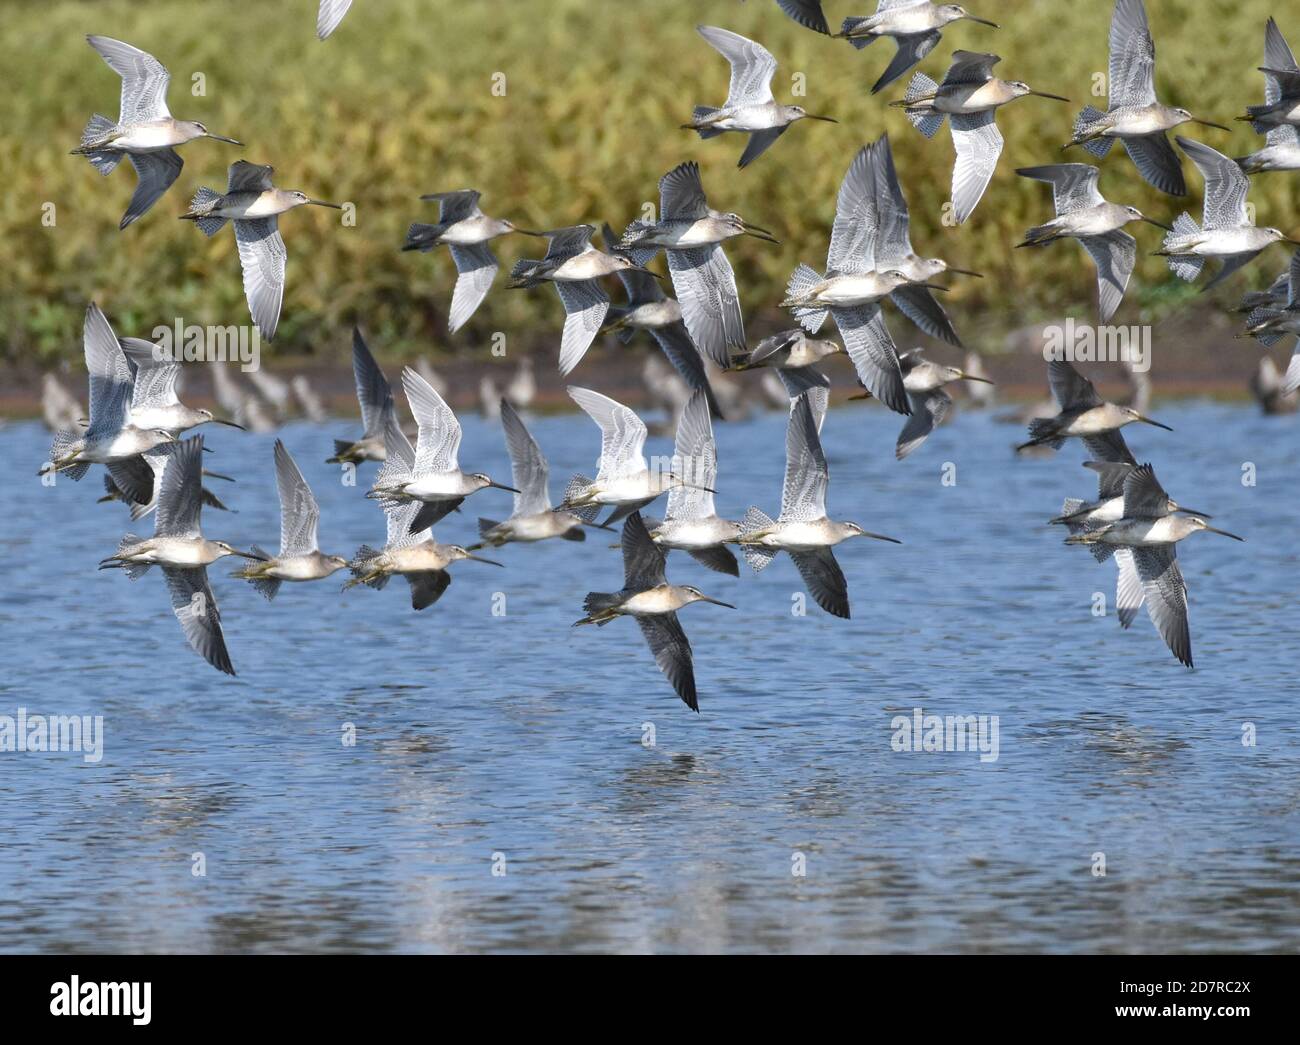 A flock of long-billed dowitchers (Limnodromus scolopaceus) in flight over water on Watsonville Slough in California Stock Photo